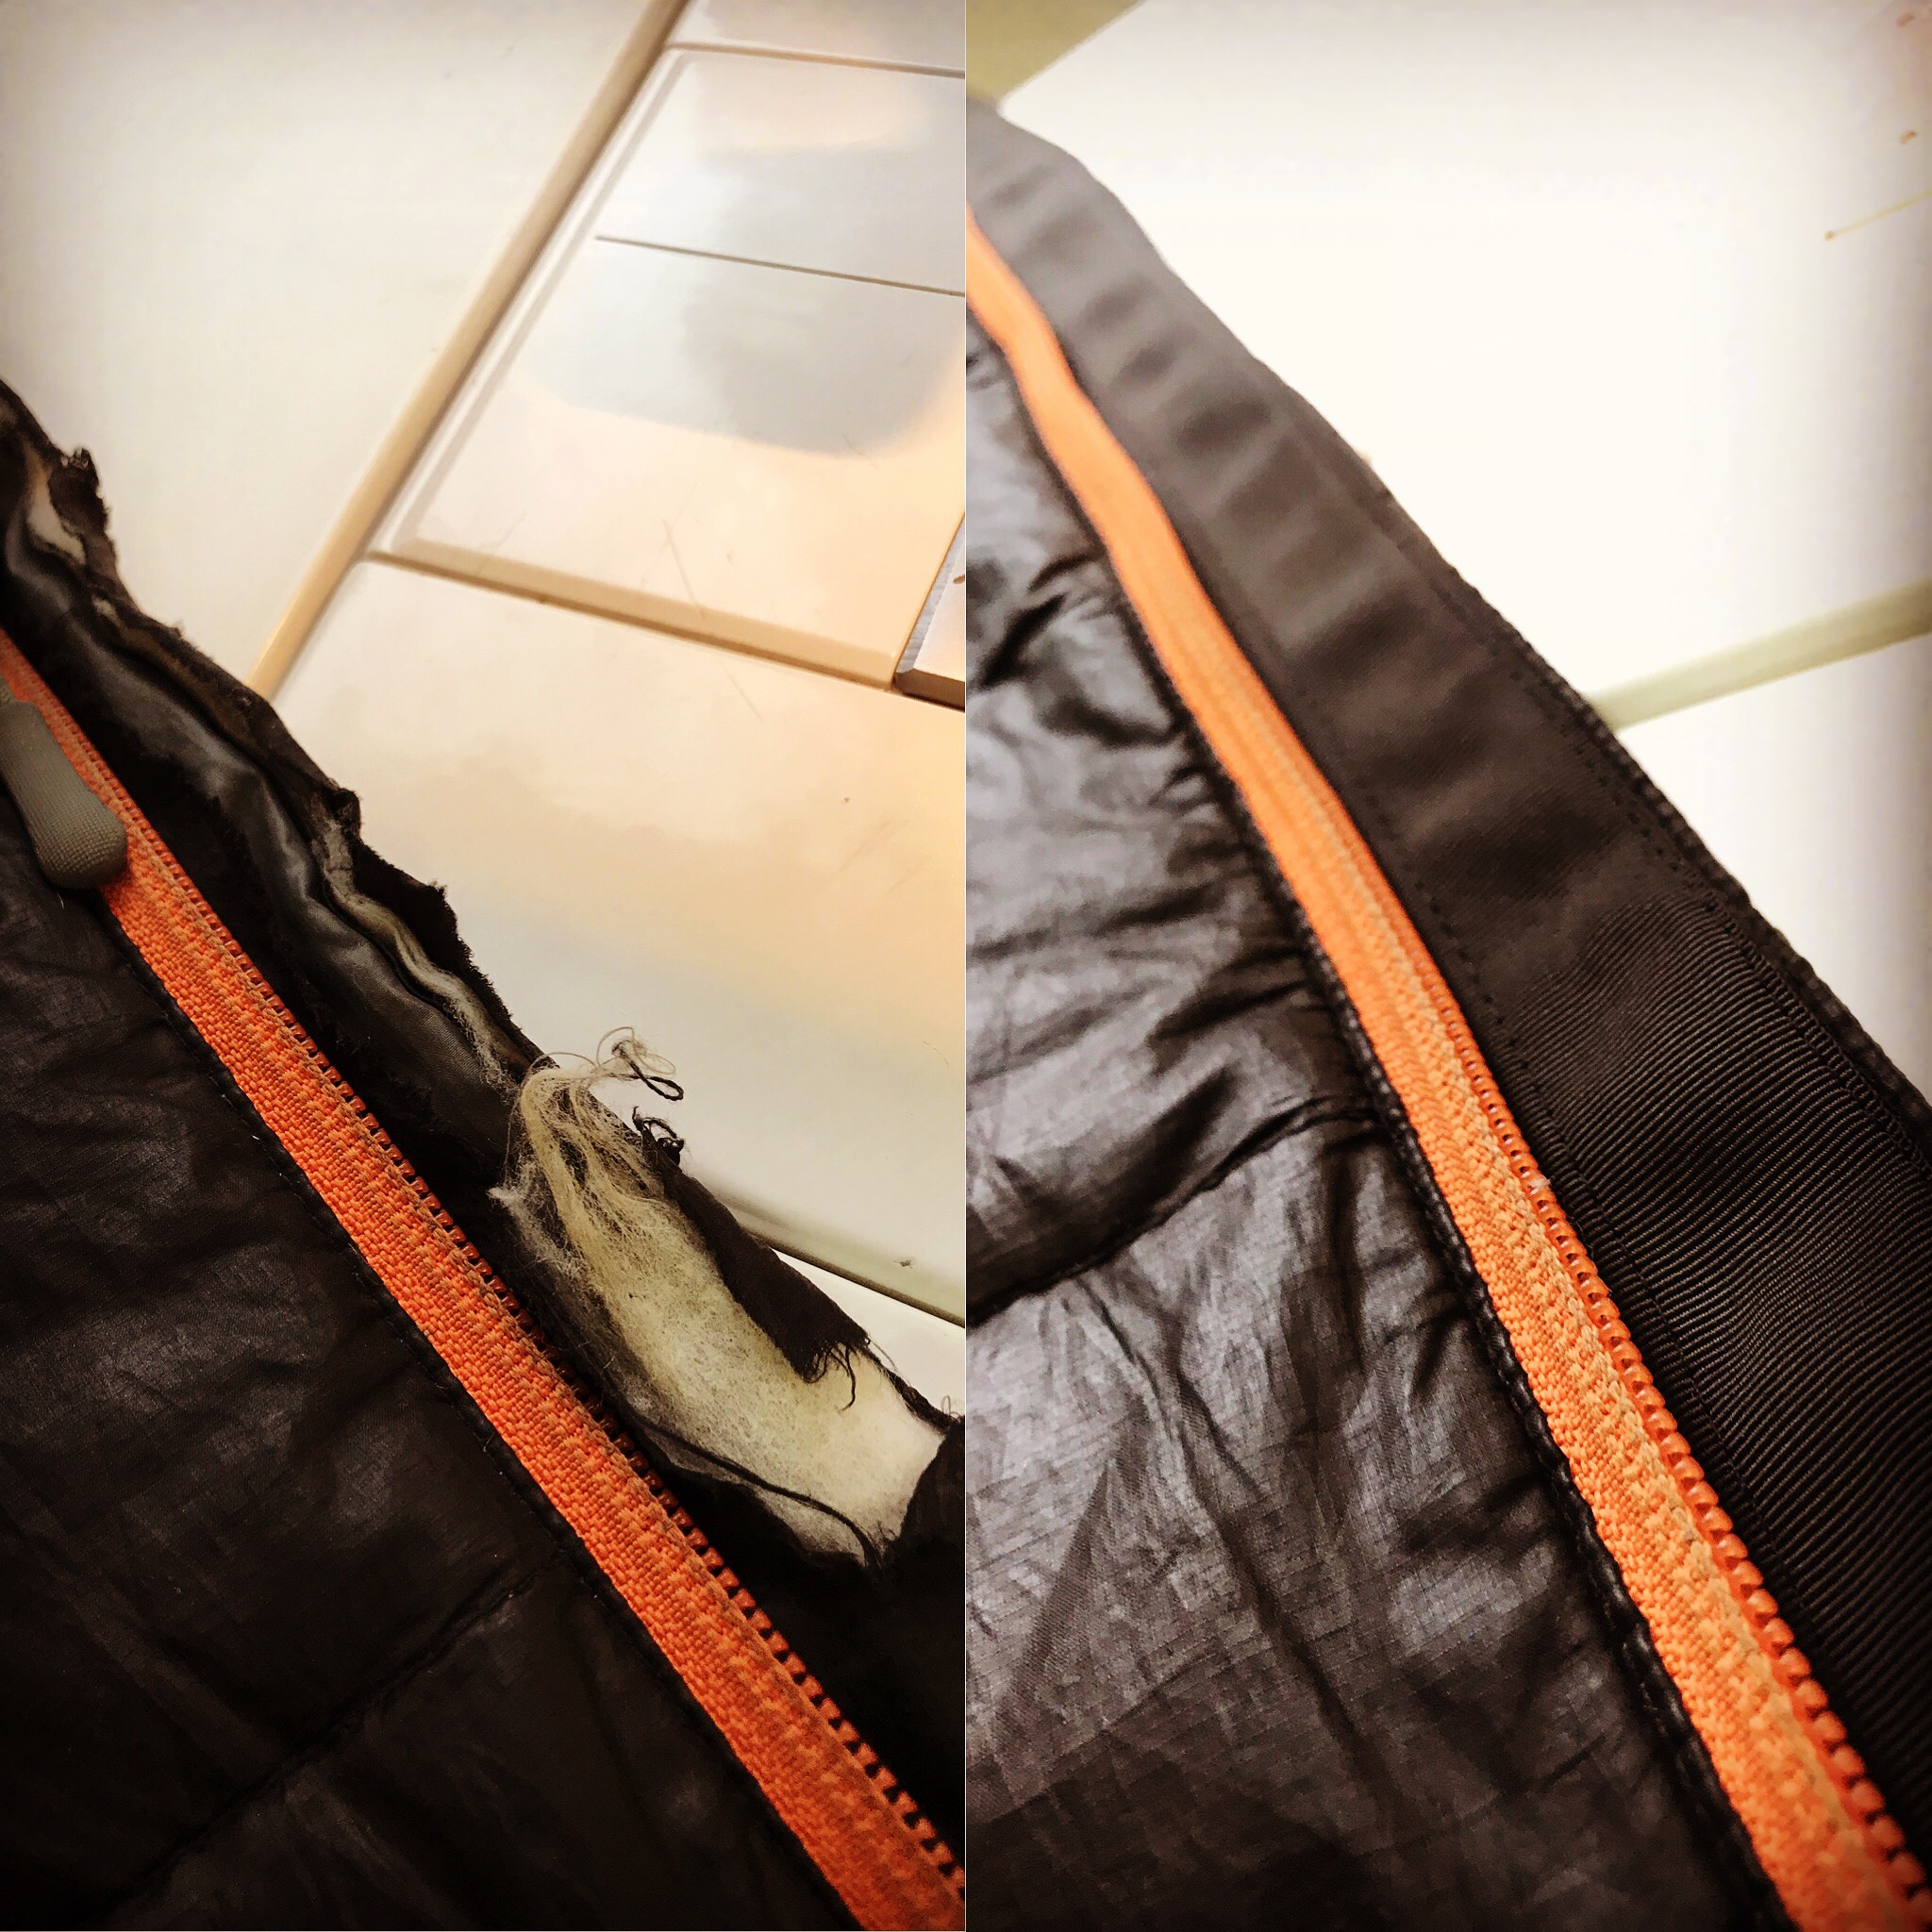 Grosgrain tape applied to the zipper flap of this puffy jacket